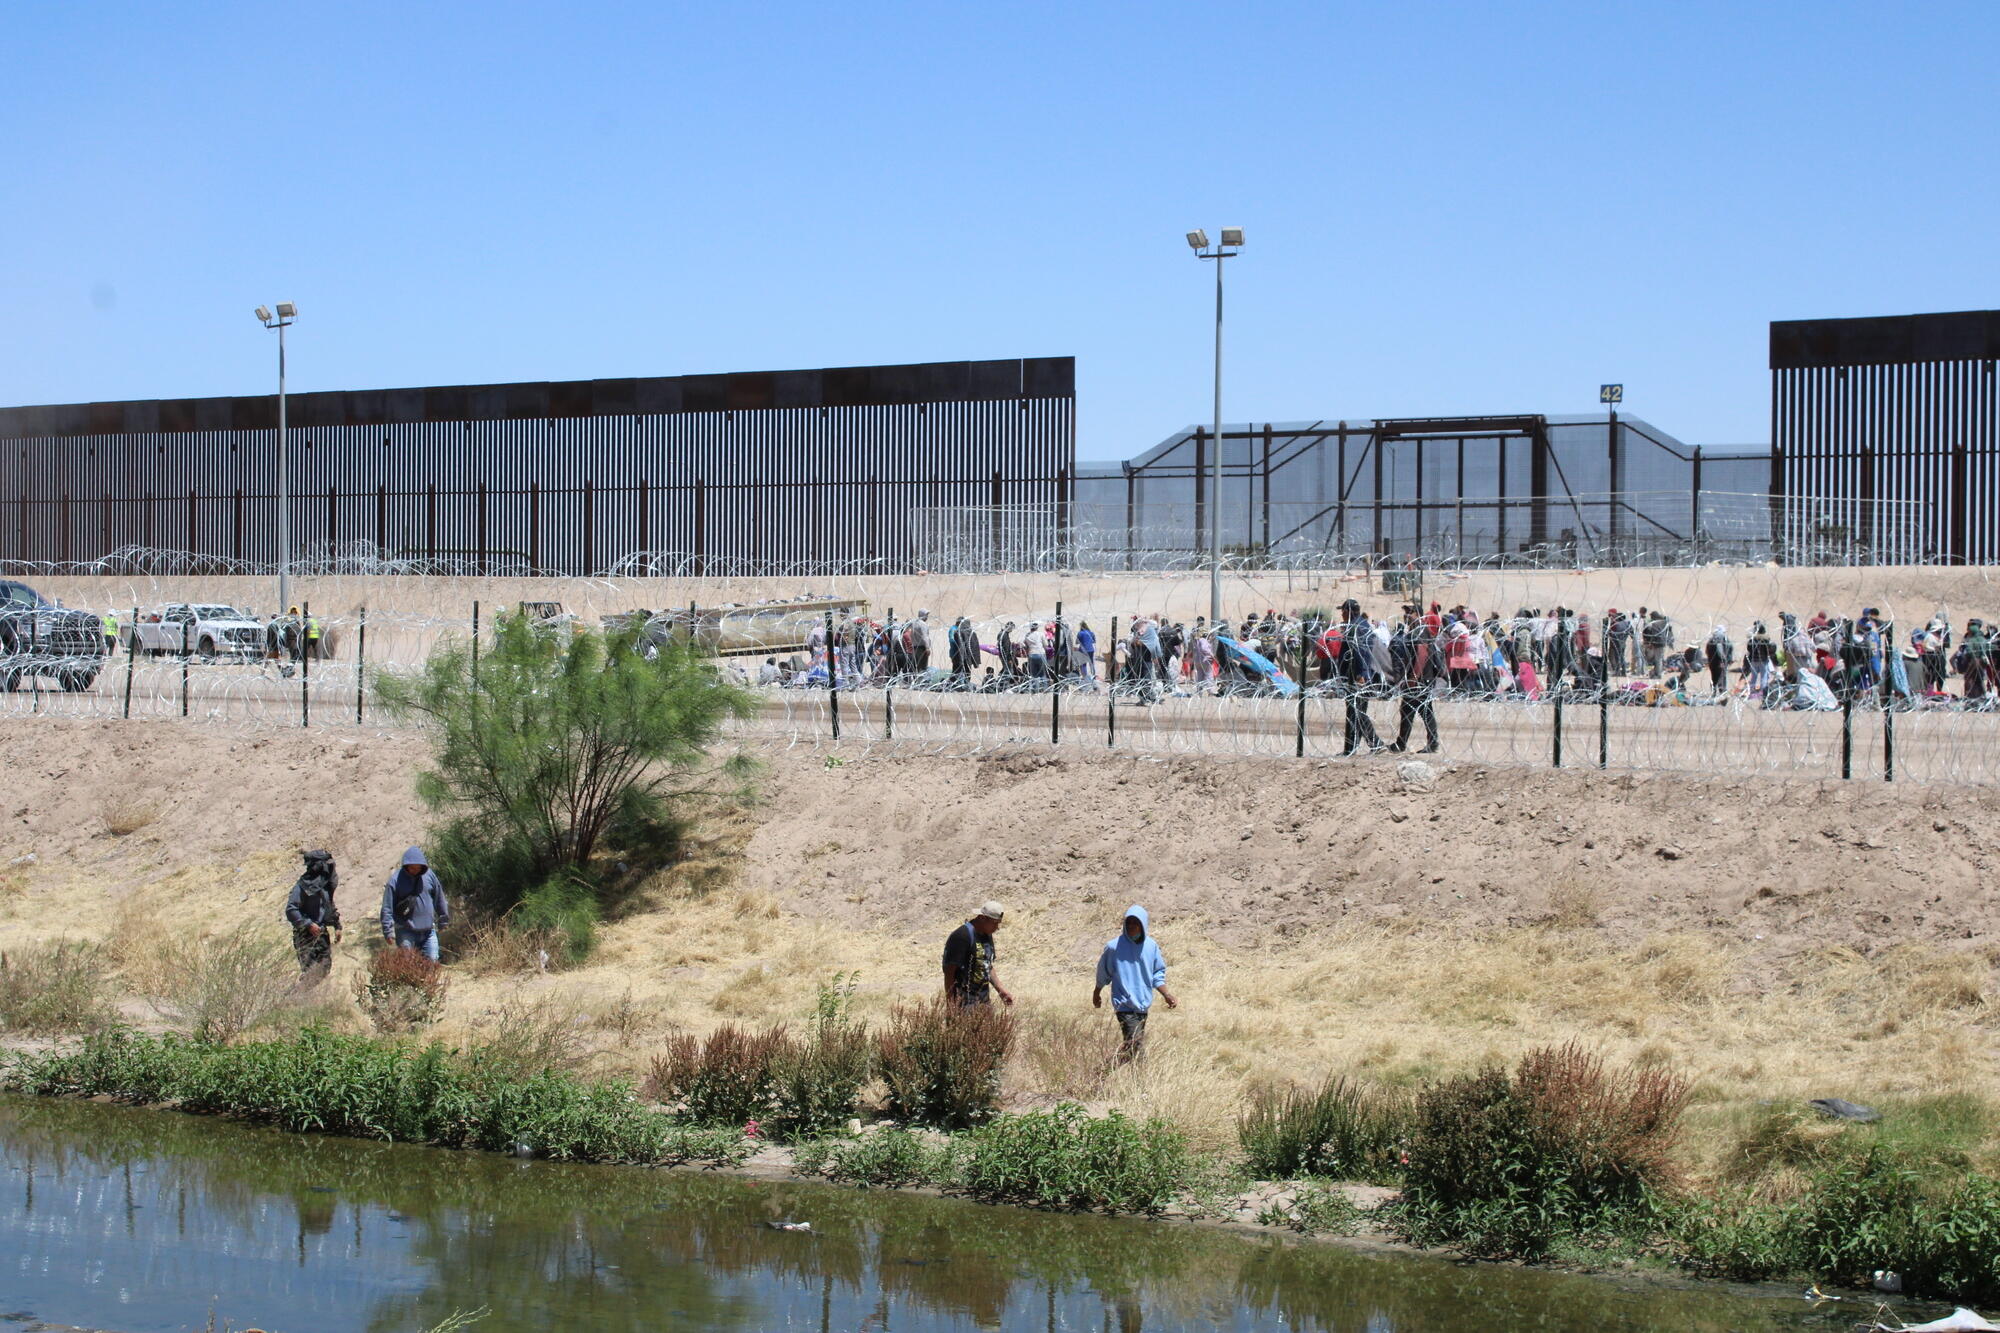 People queuing at the US-Mexico border.